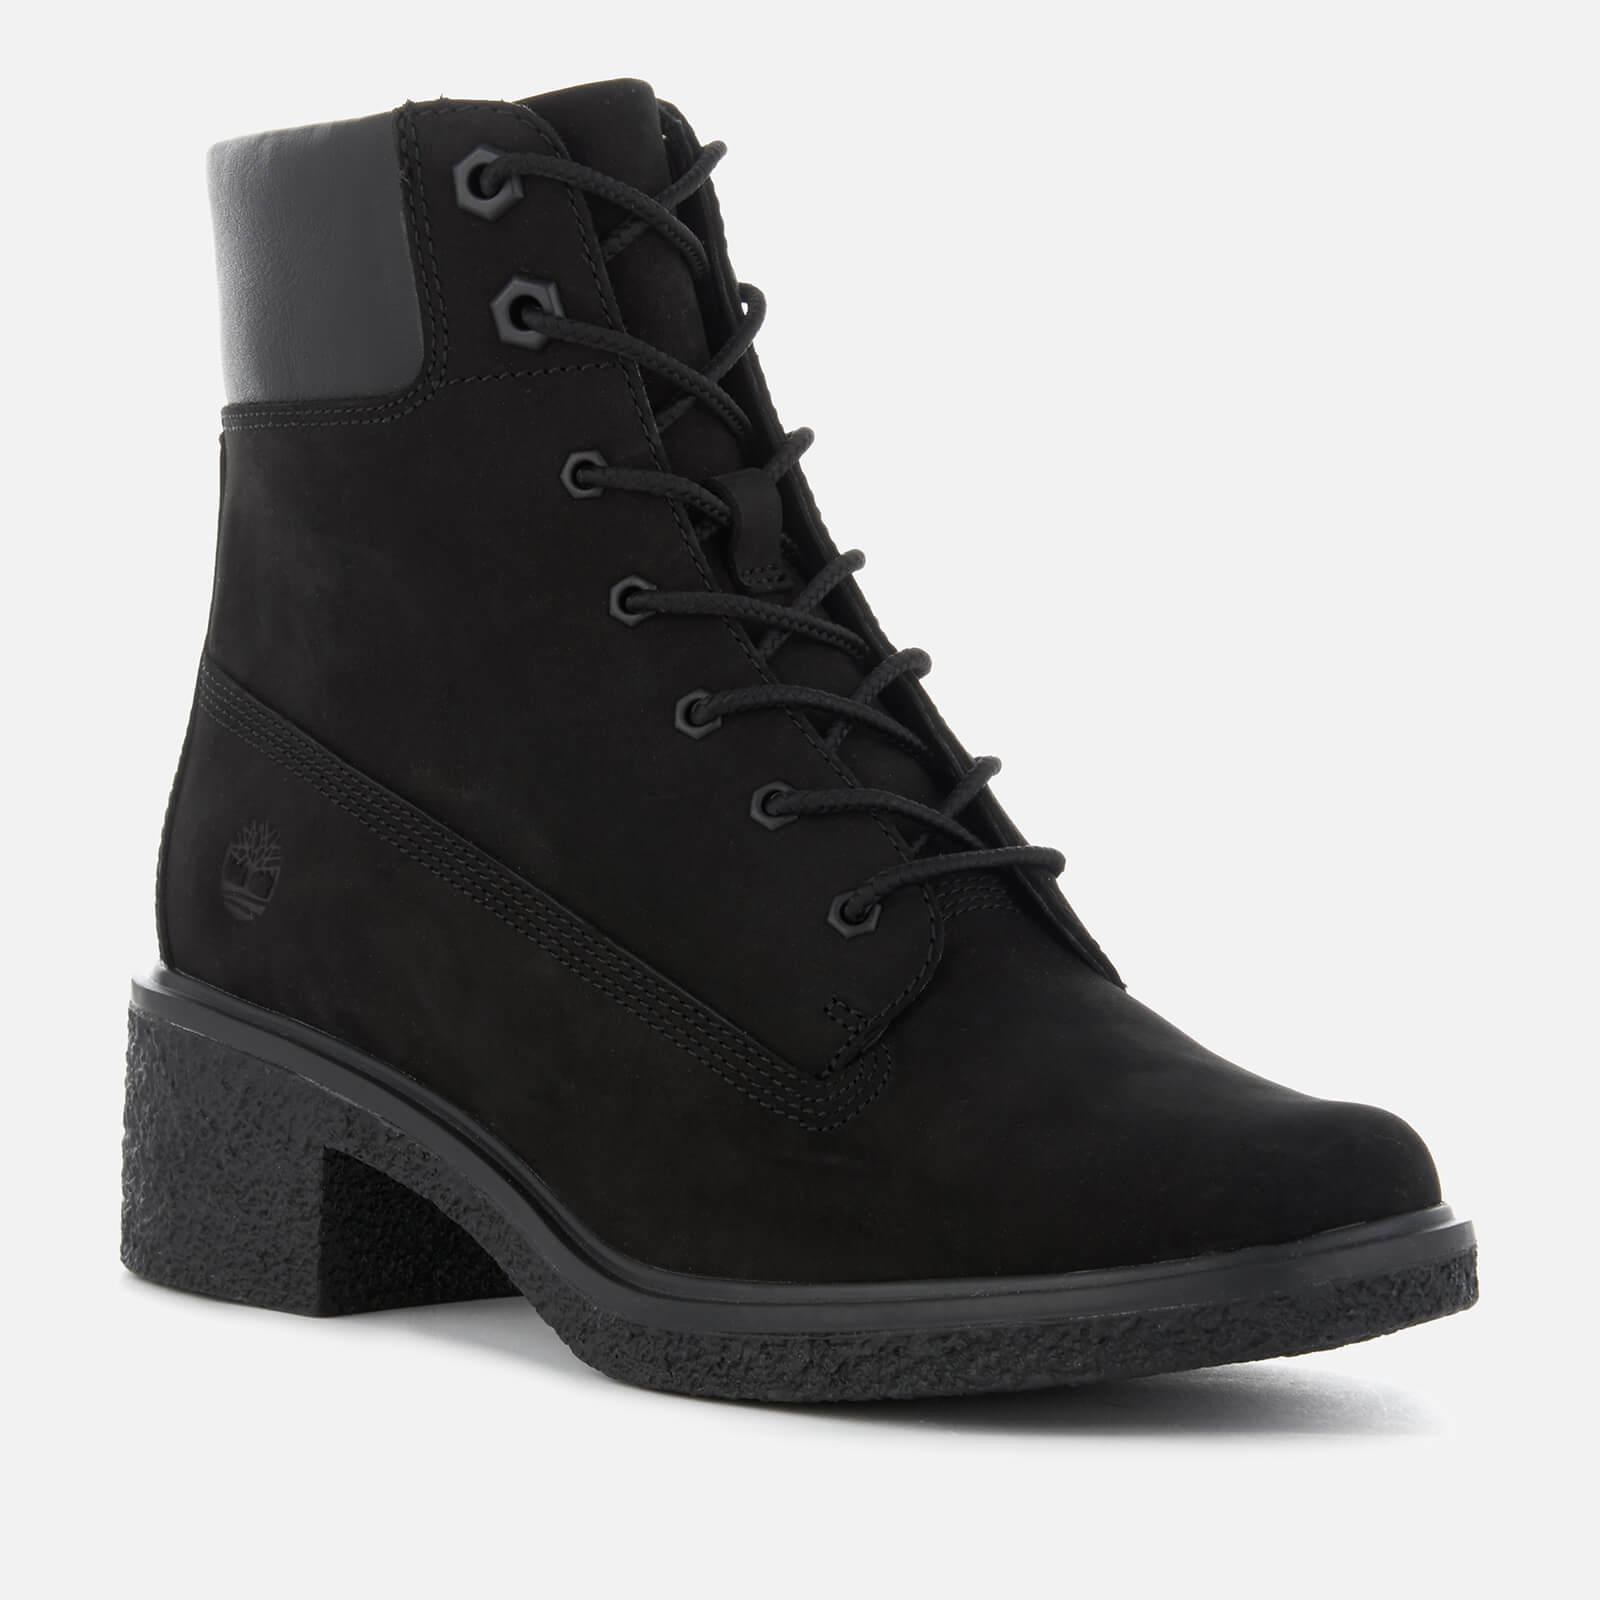 timberland lace up heel boots